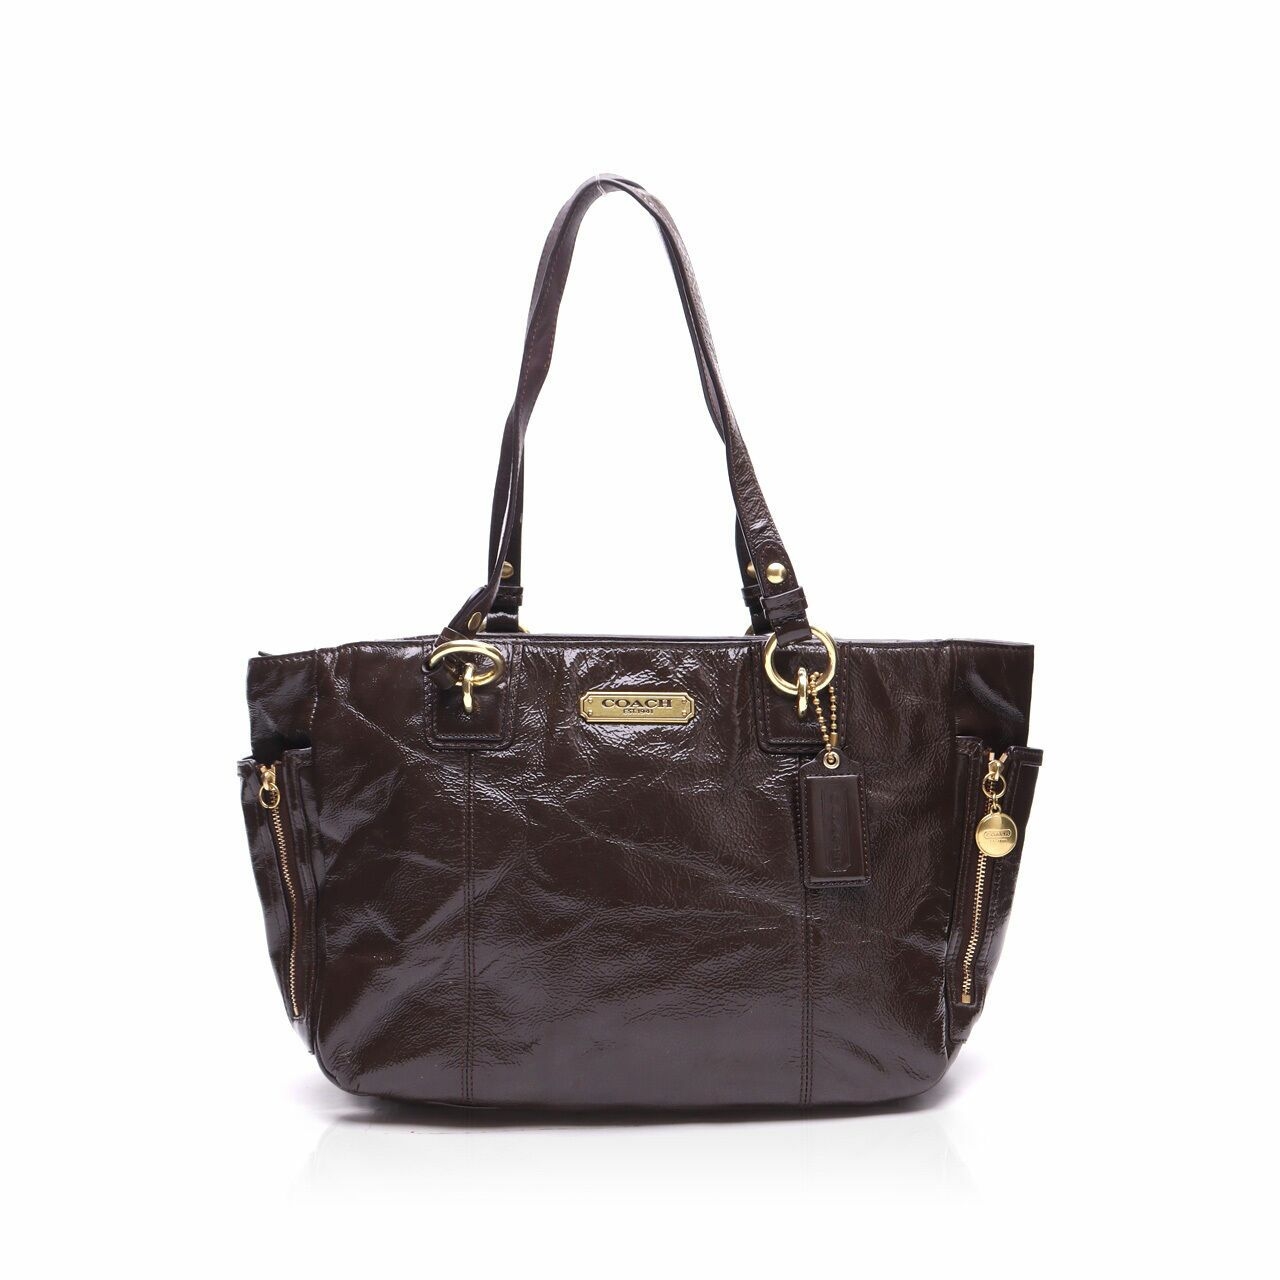 Coach Gallery Brown Patent Leather Tote Bag